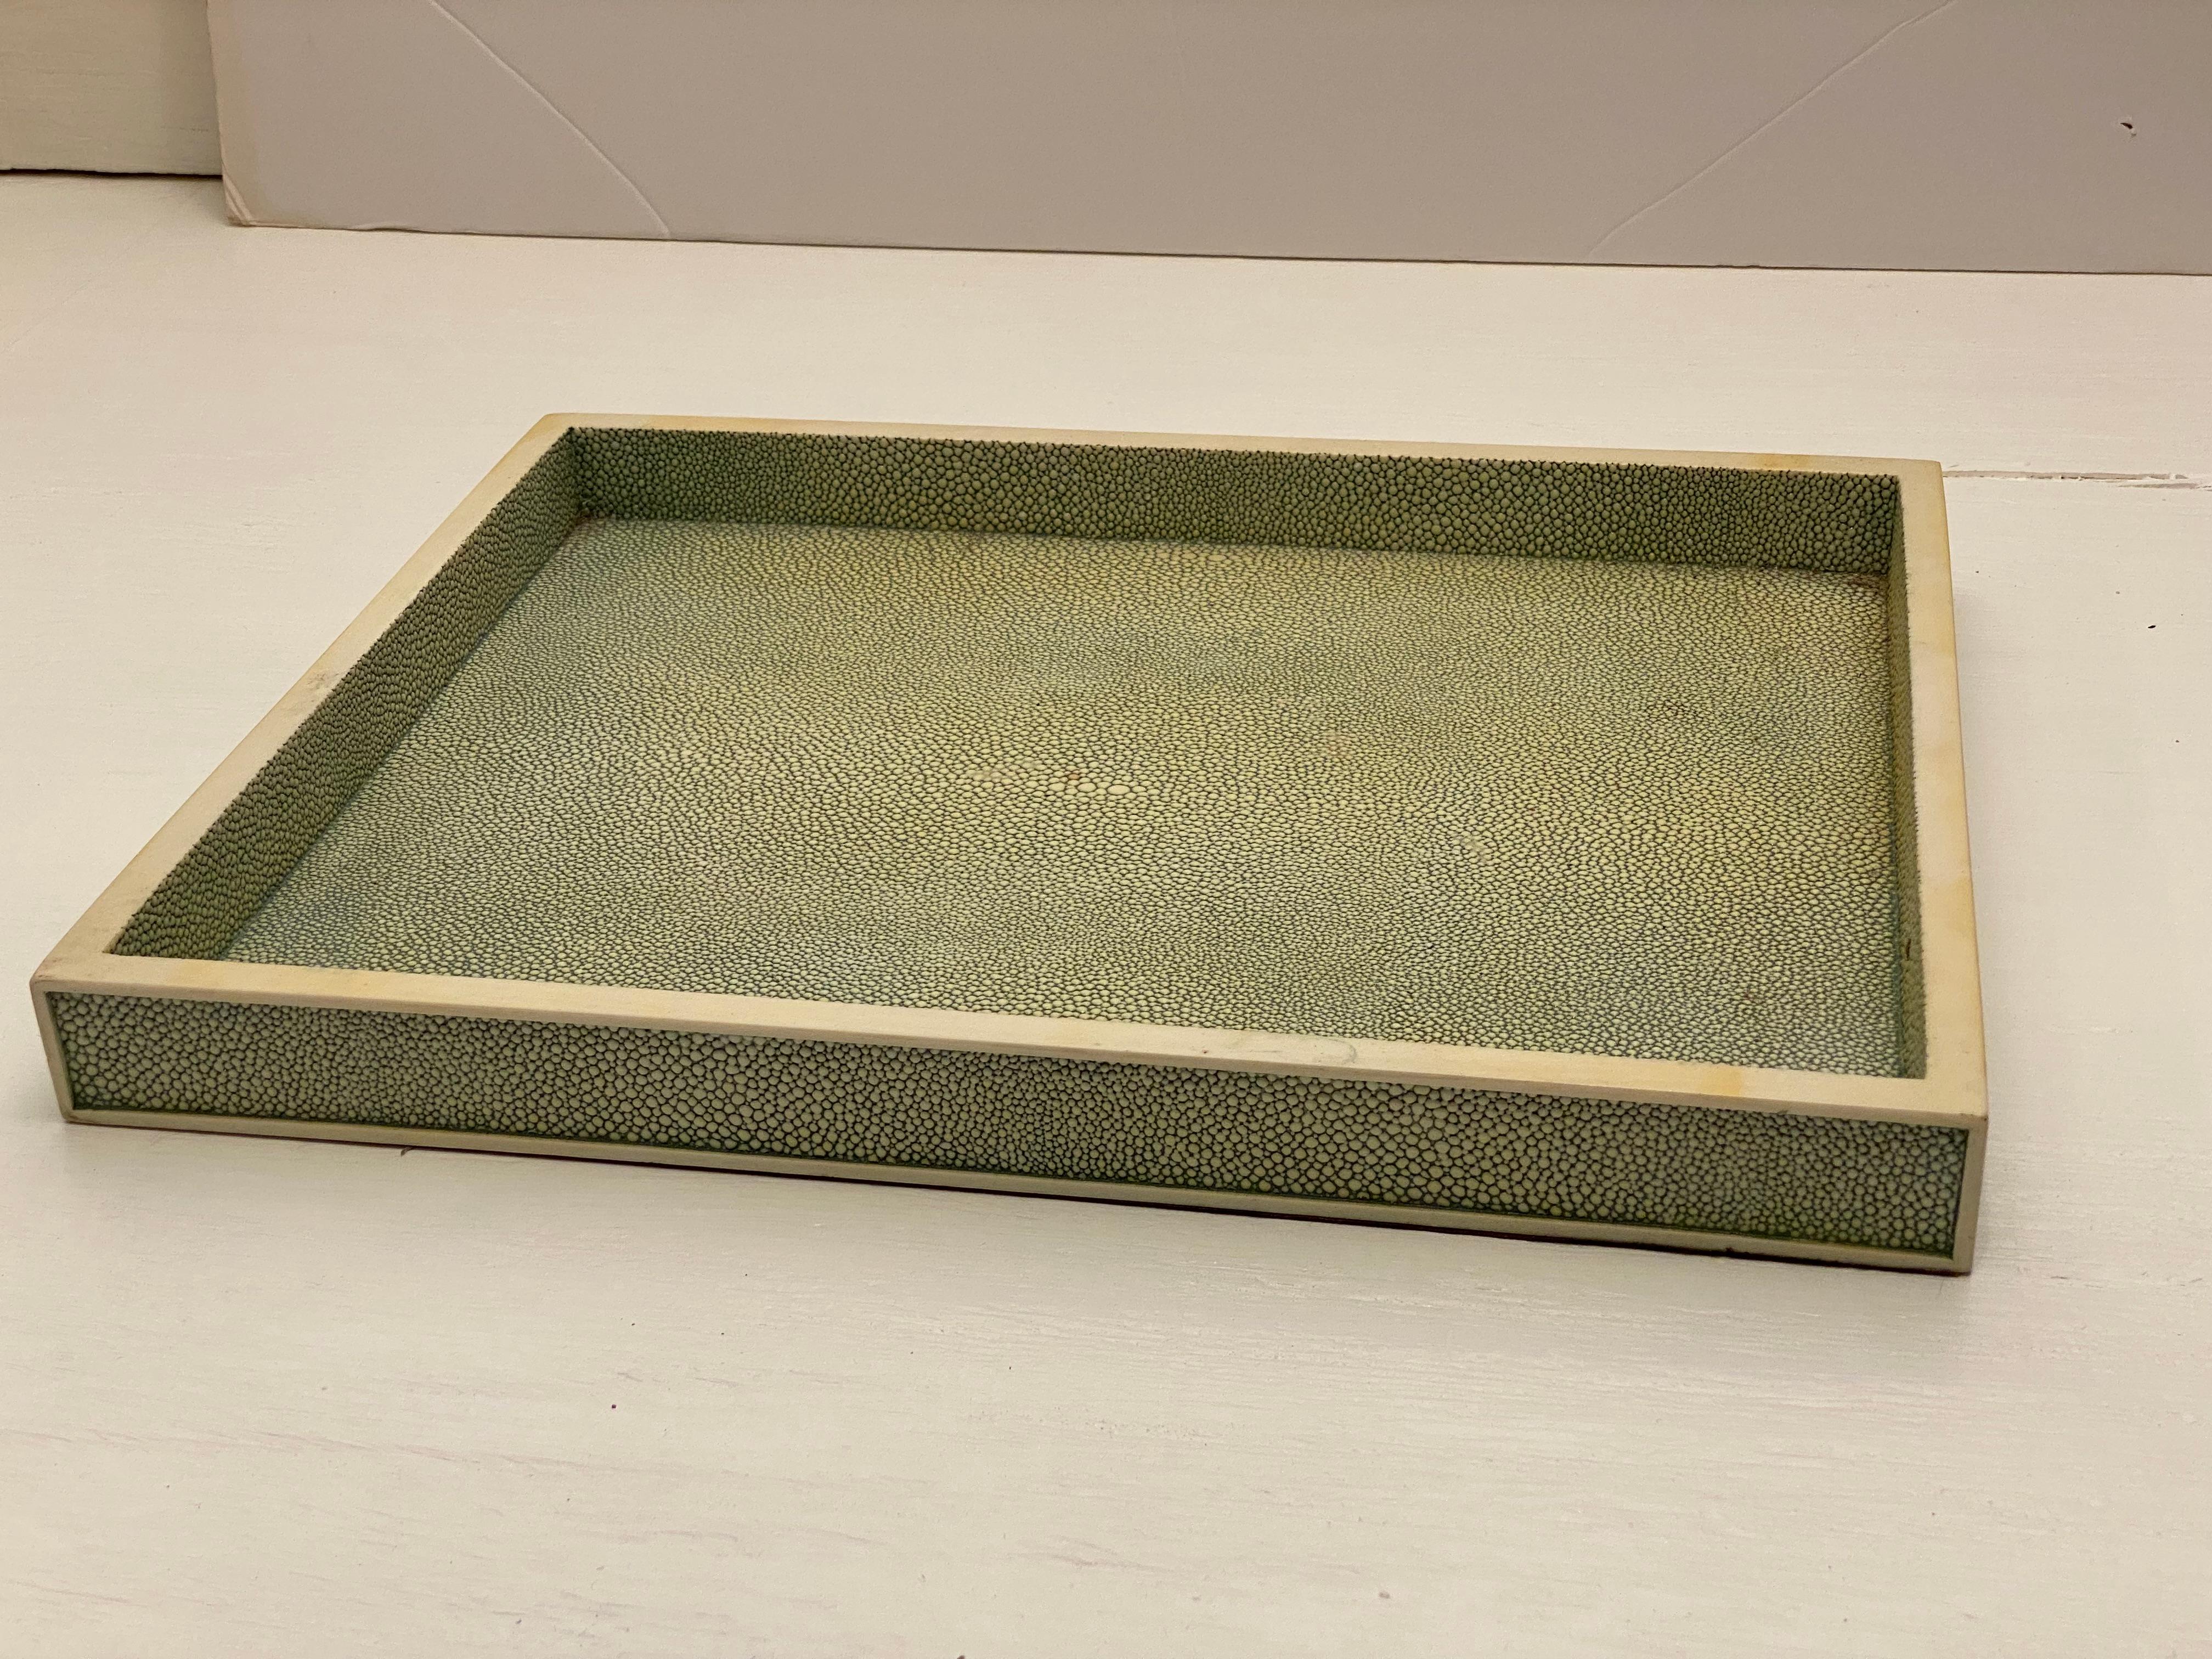 Shagreen tray, circa 1980. Most likely R & Y Augousti. Good overall condition with some fading and minor staining from age and use.

Approximately 12.88